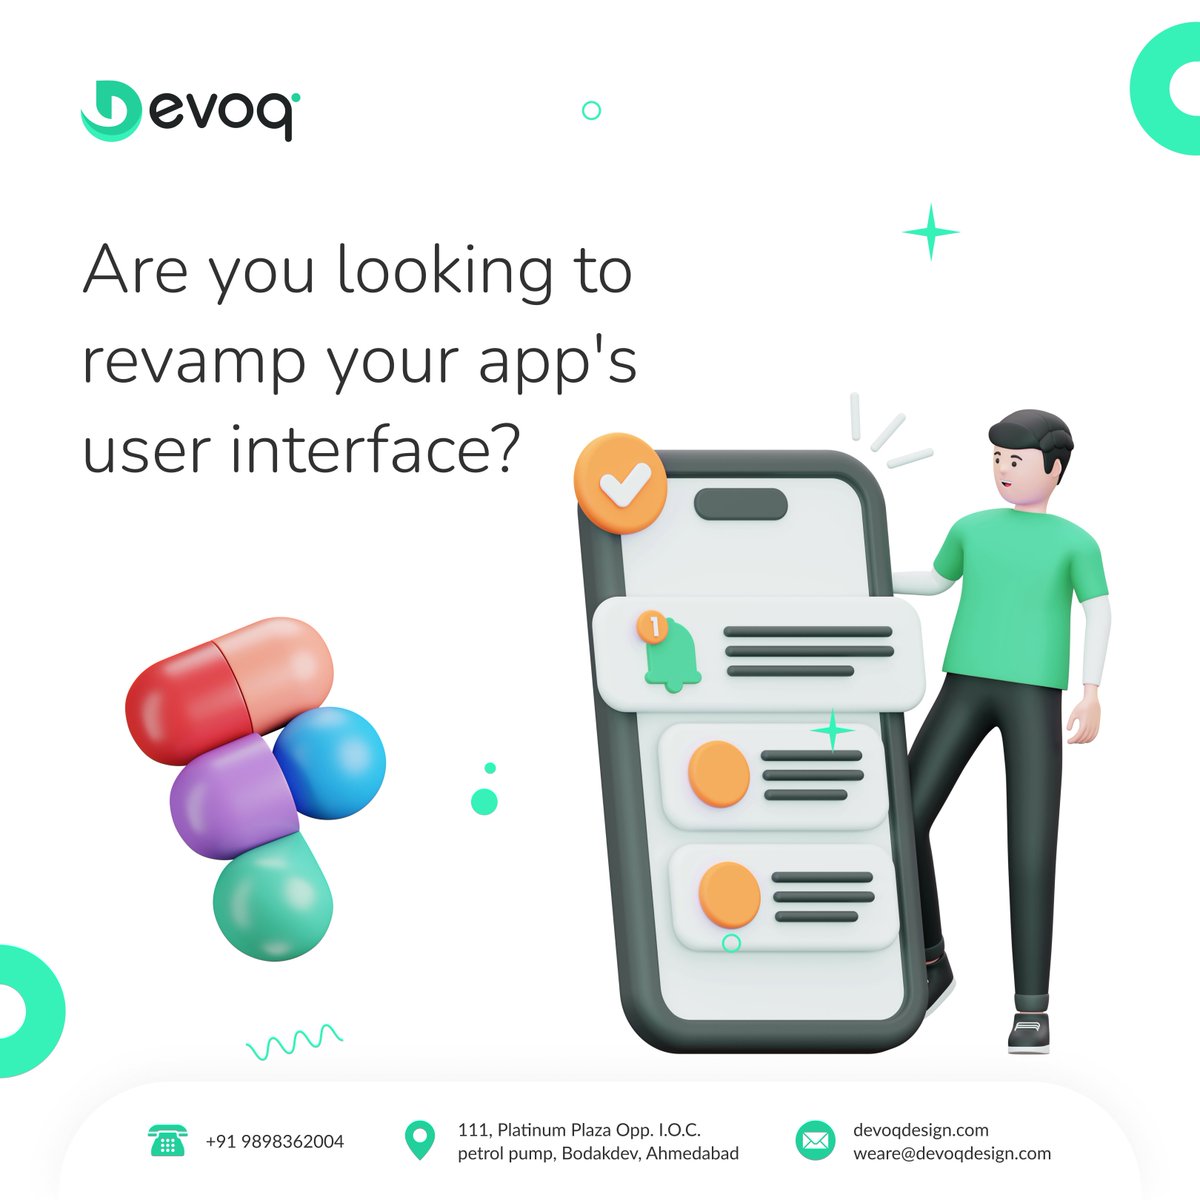 Our expert team of UI designers is here to help you create a visually stunning and intuitive interface that will leave your users delighted. Get in touch with us today!
#UIRevamp #AppDesign #UserInterface #Mobileapp #UIUXDesign #UXDesign #MobileFirstDesign #UserExperience #Devoq